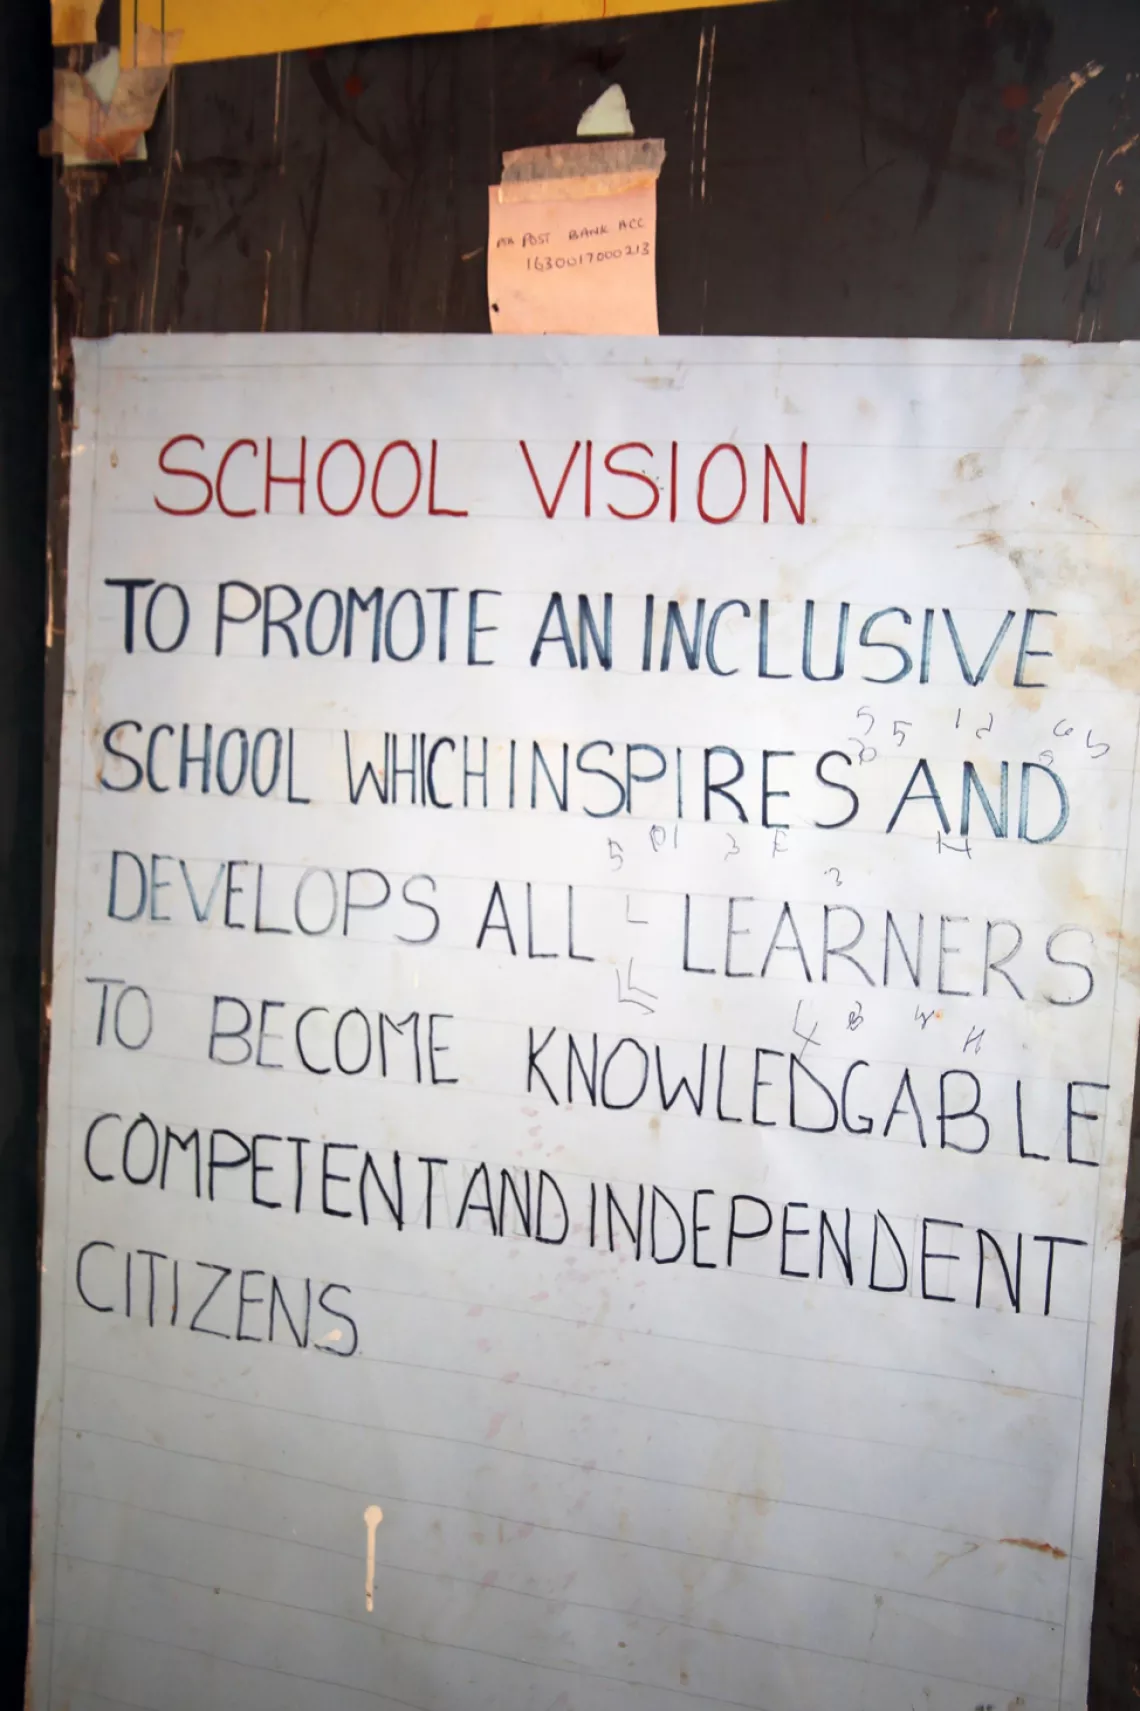 Kamurasi School Vision: To promote an inclusive school which inspires and develops all learners to become knowledgable competent and independent citizens